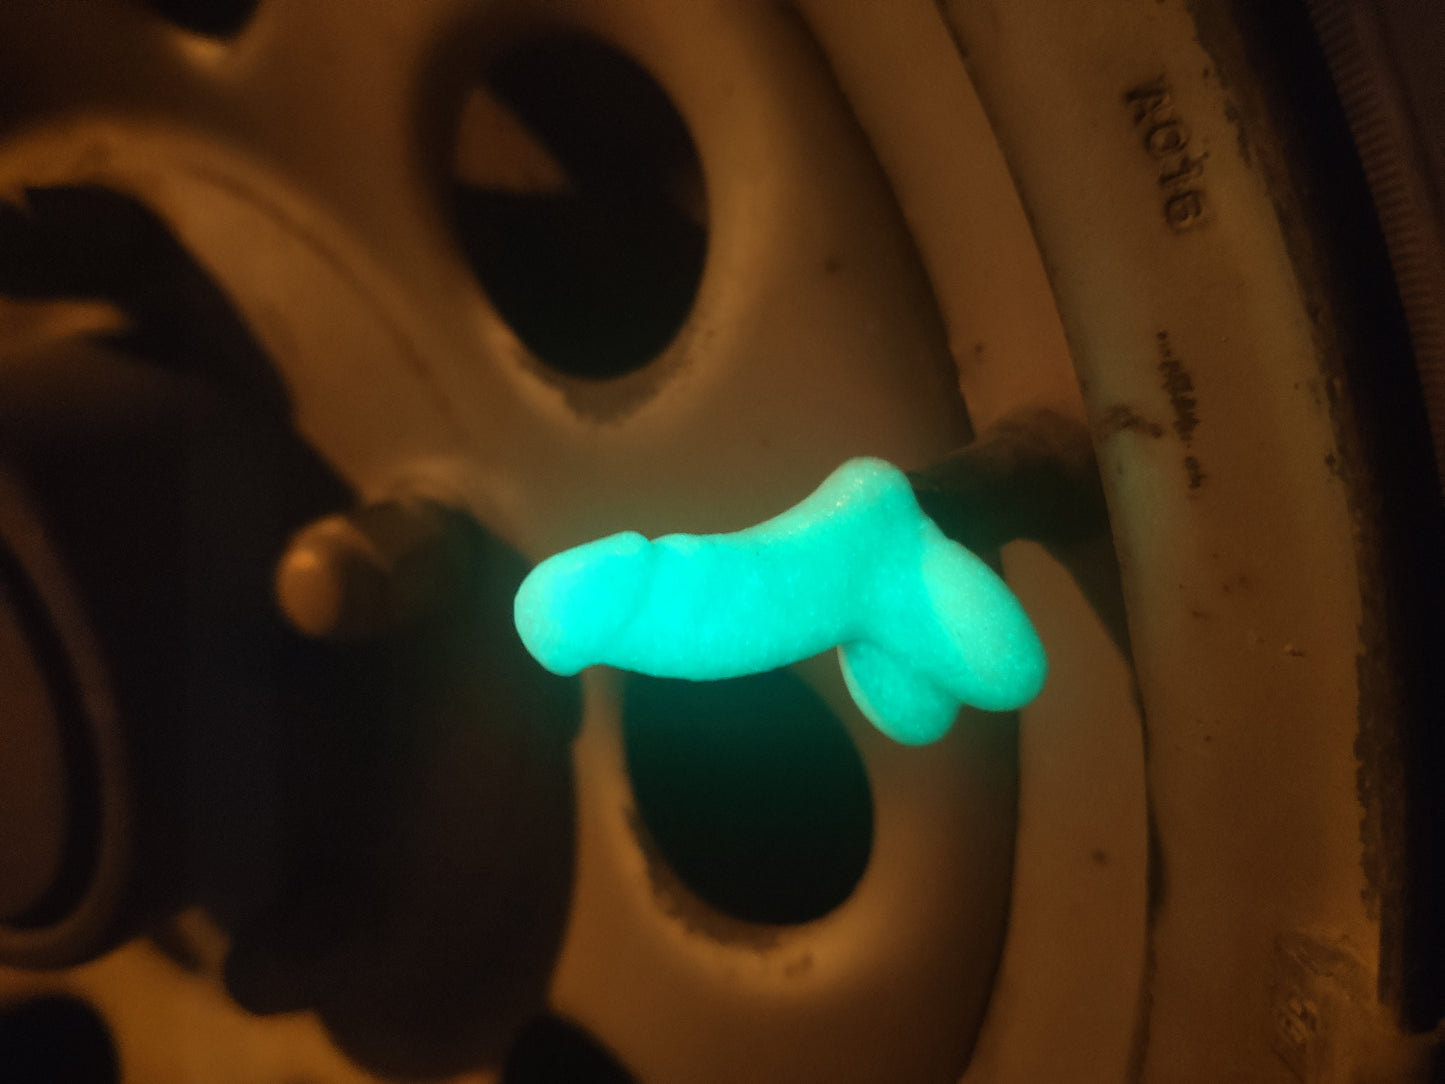 Dick Penis Tire Valve Cover Stem Caps Glow In The Dark Funny Gift Novelty Prank Bachelorette Party